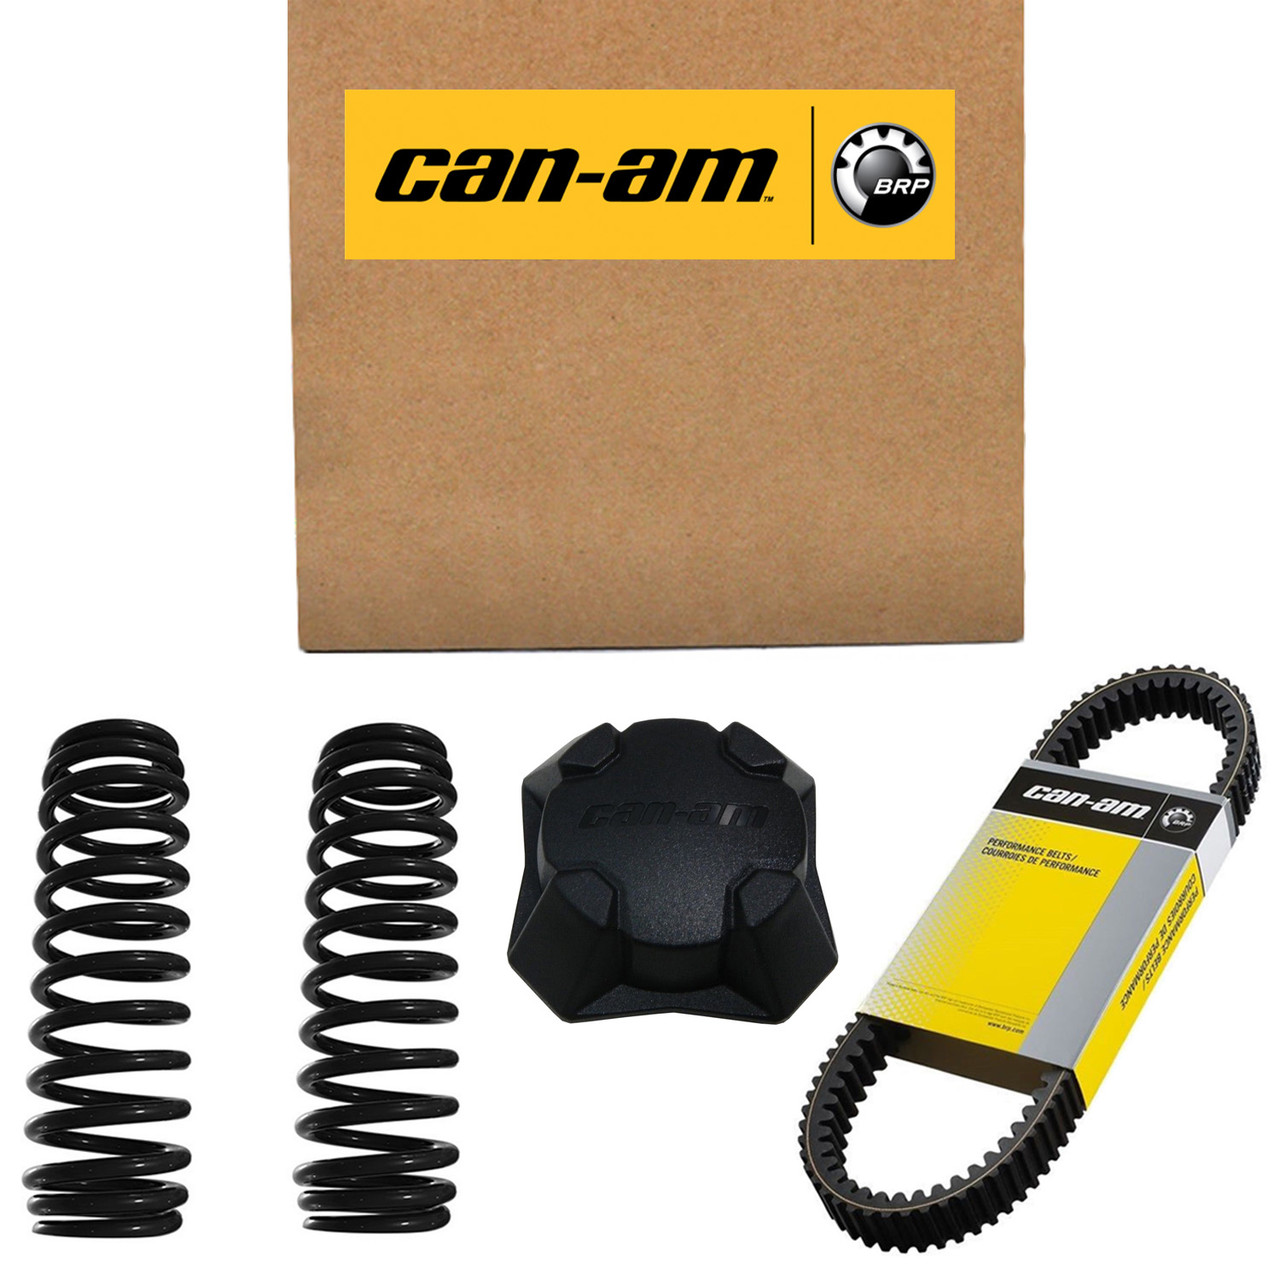 Can-Am New OEM Wiring Harness, 420664554